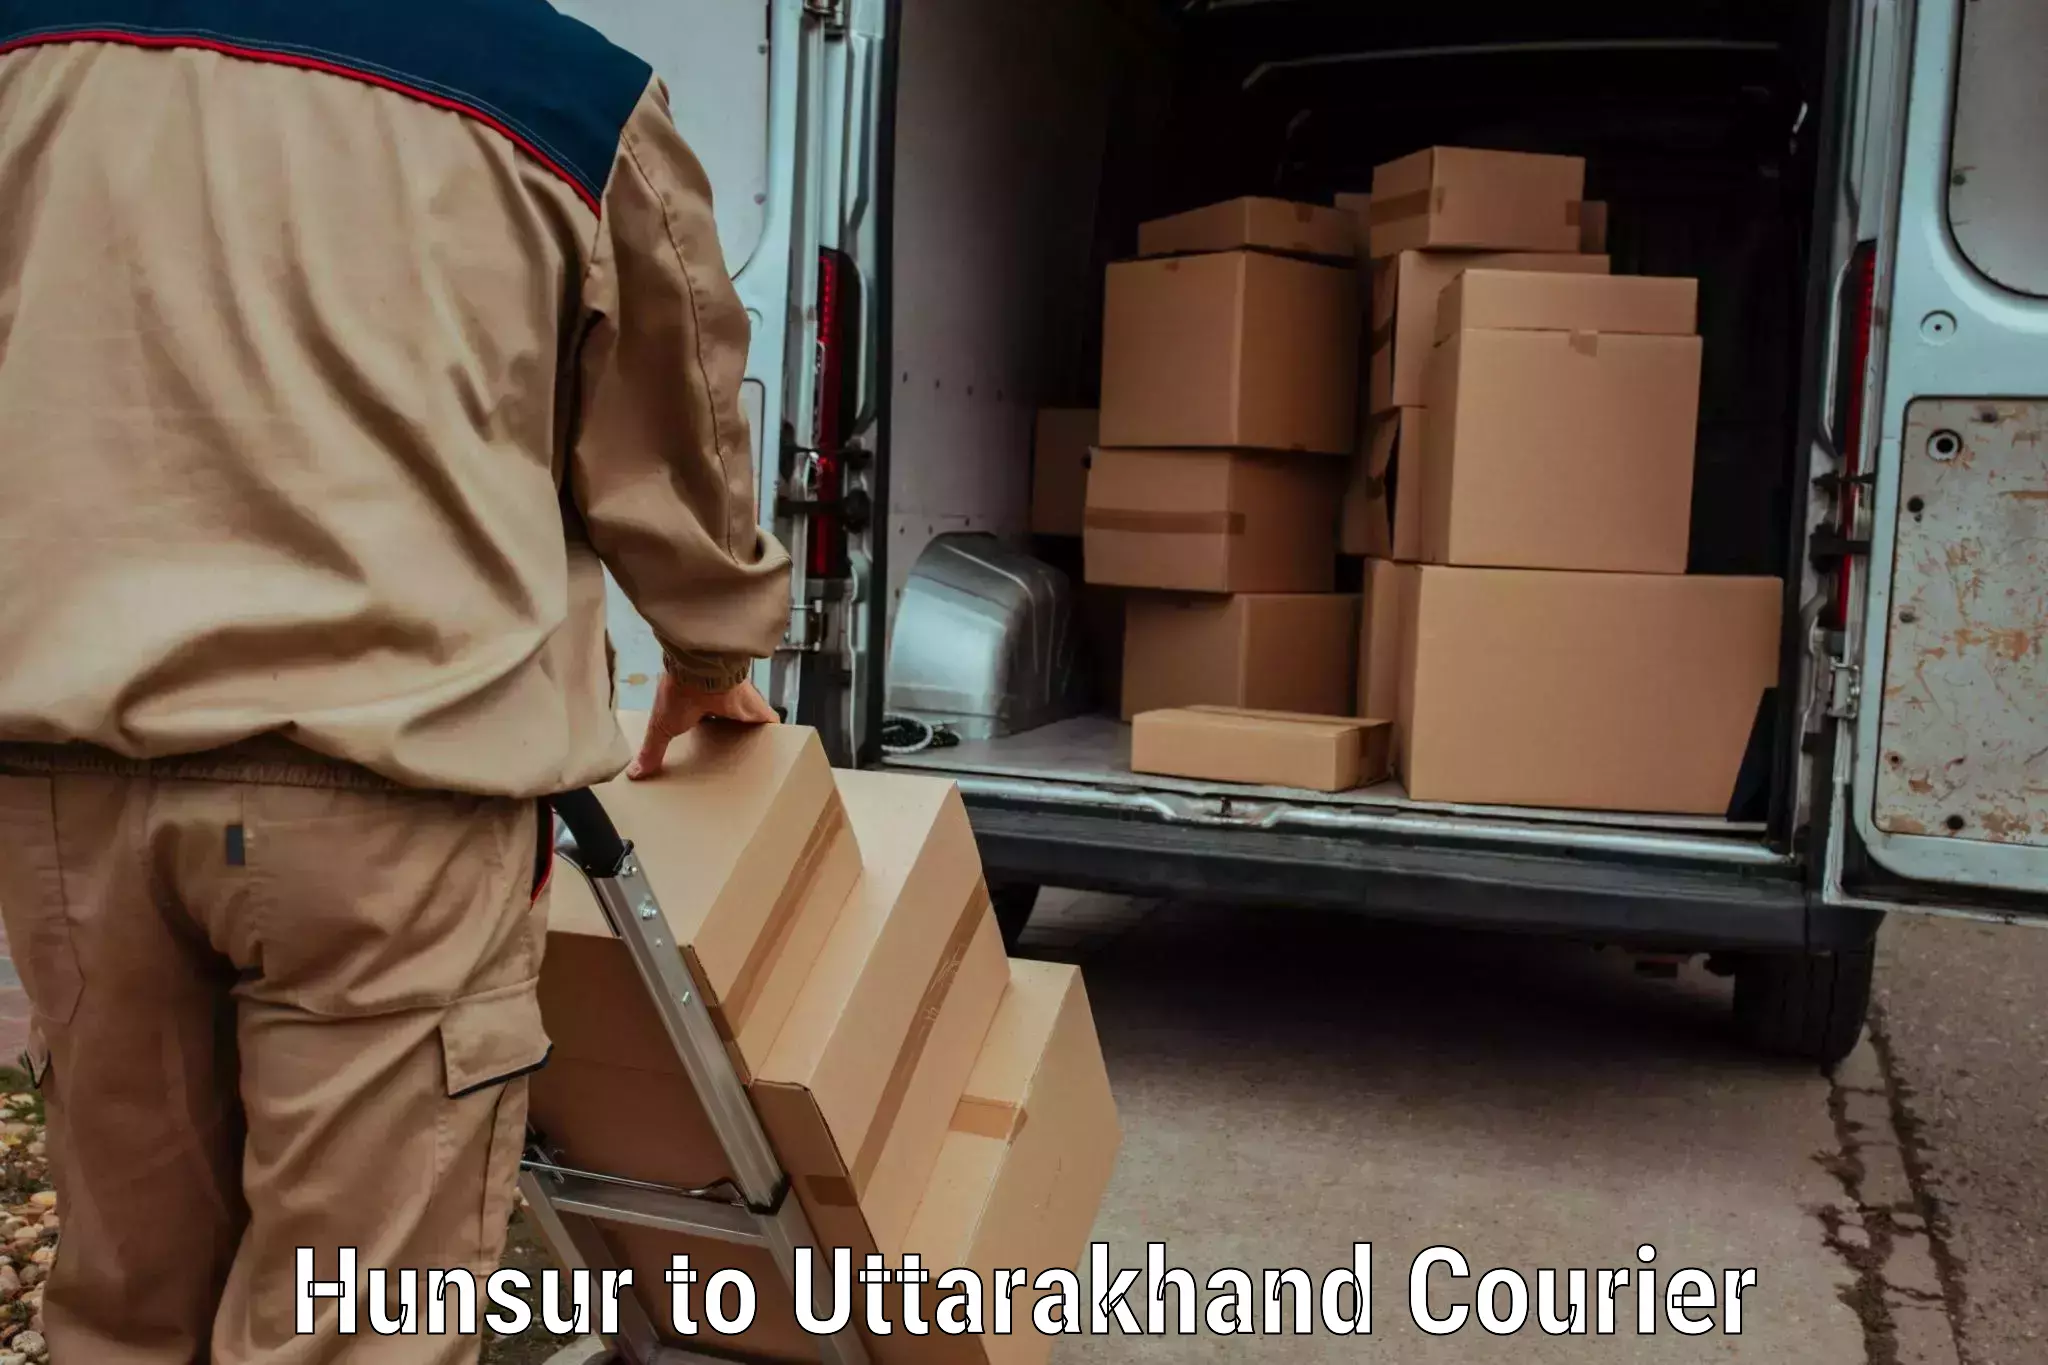 Reliable delivery network Hunsur to Udham Singh Nagar